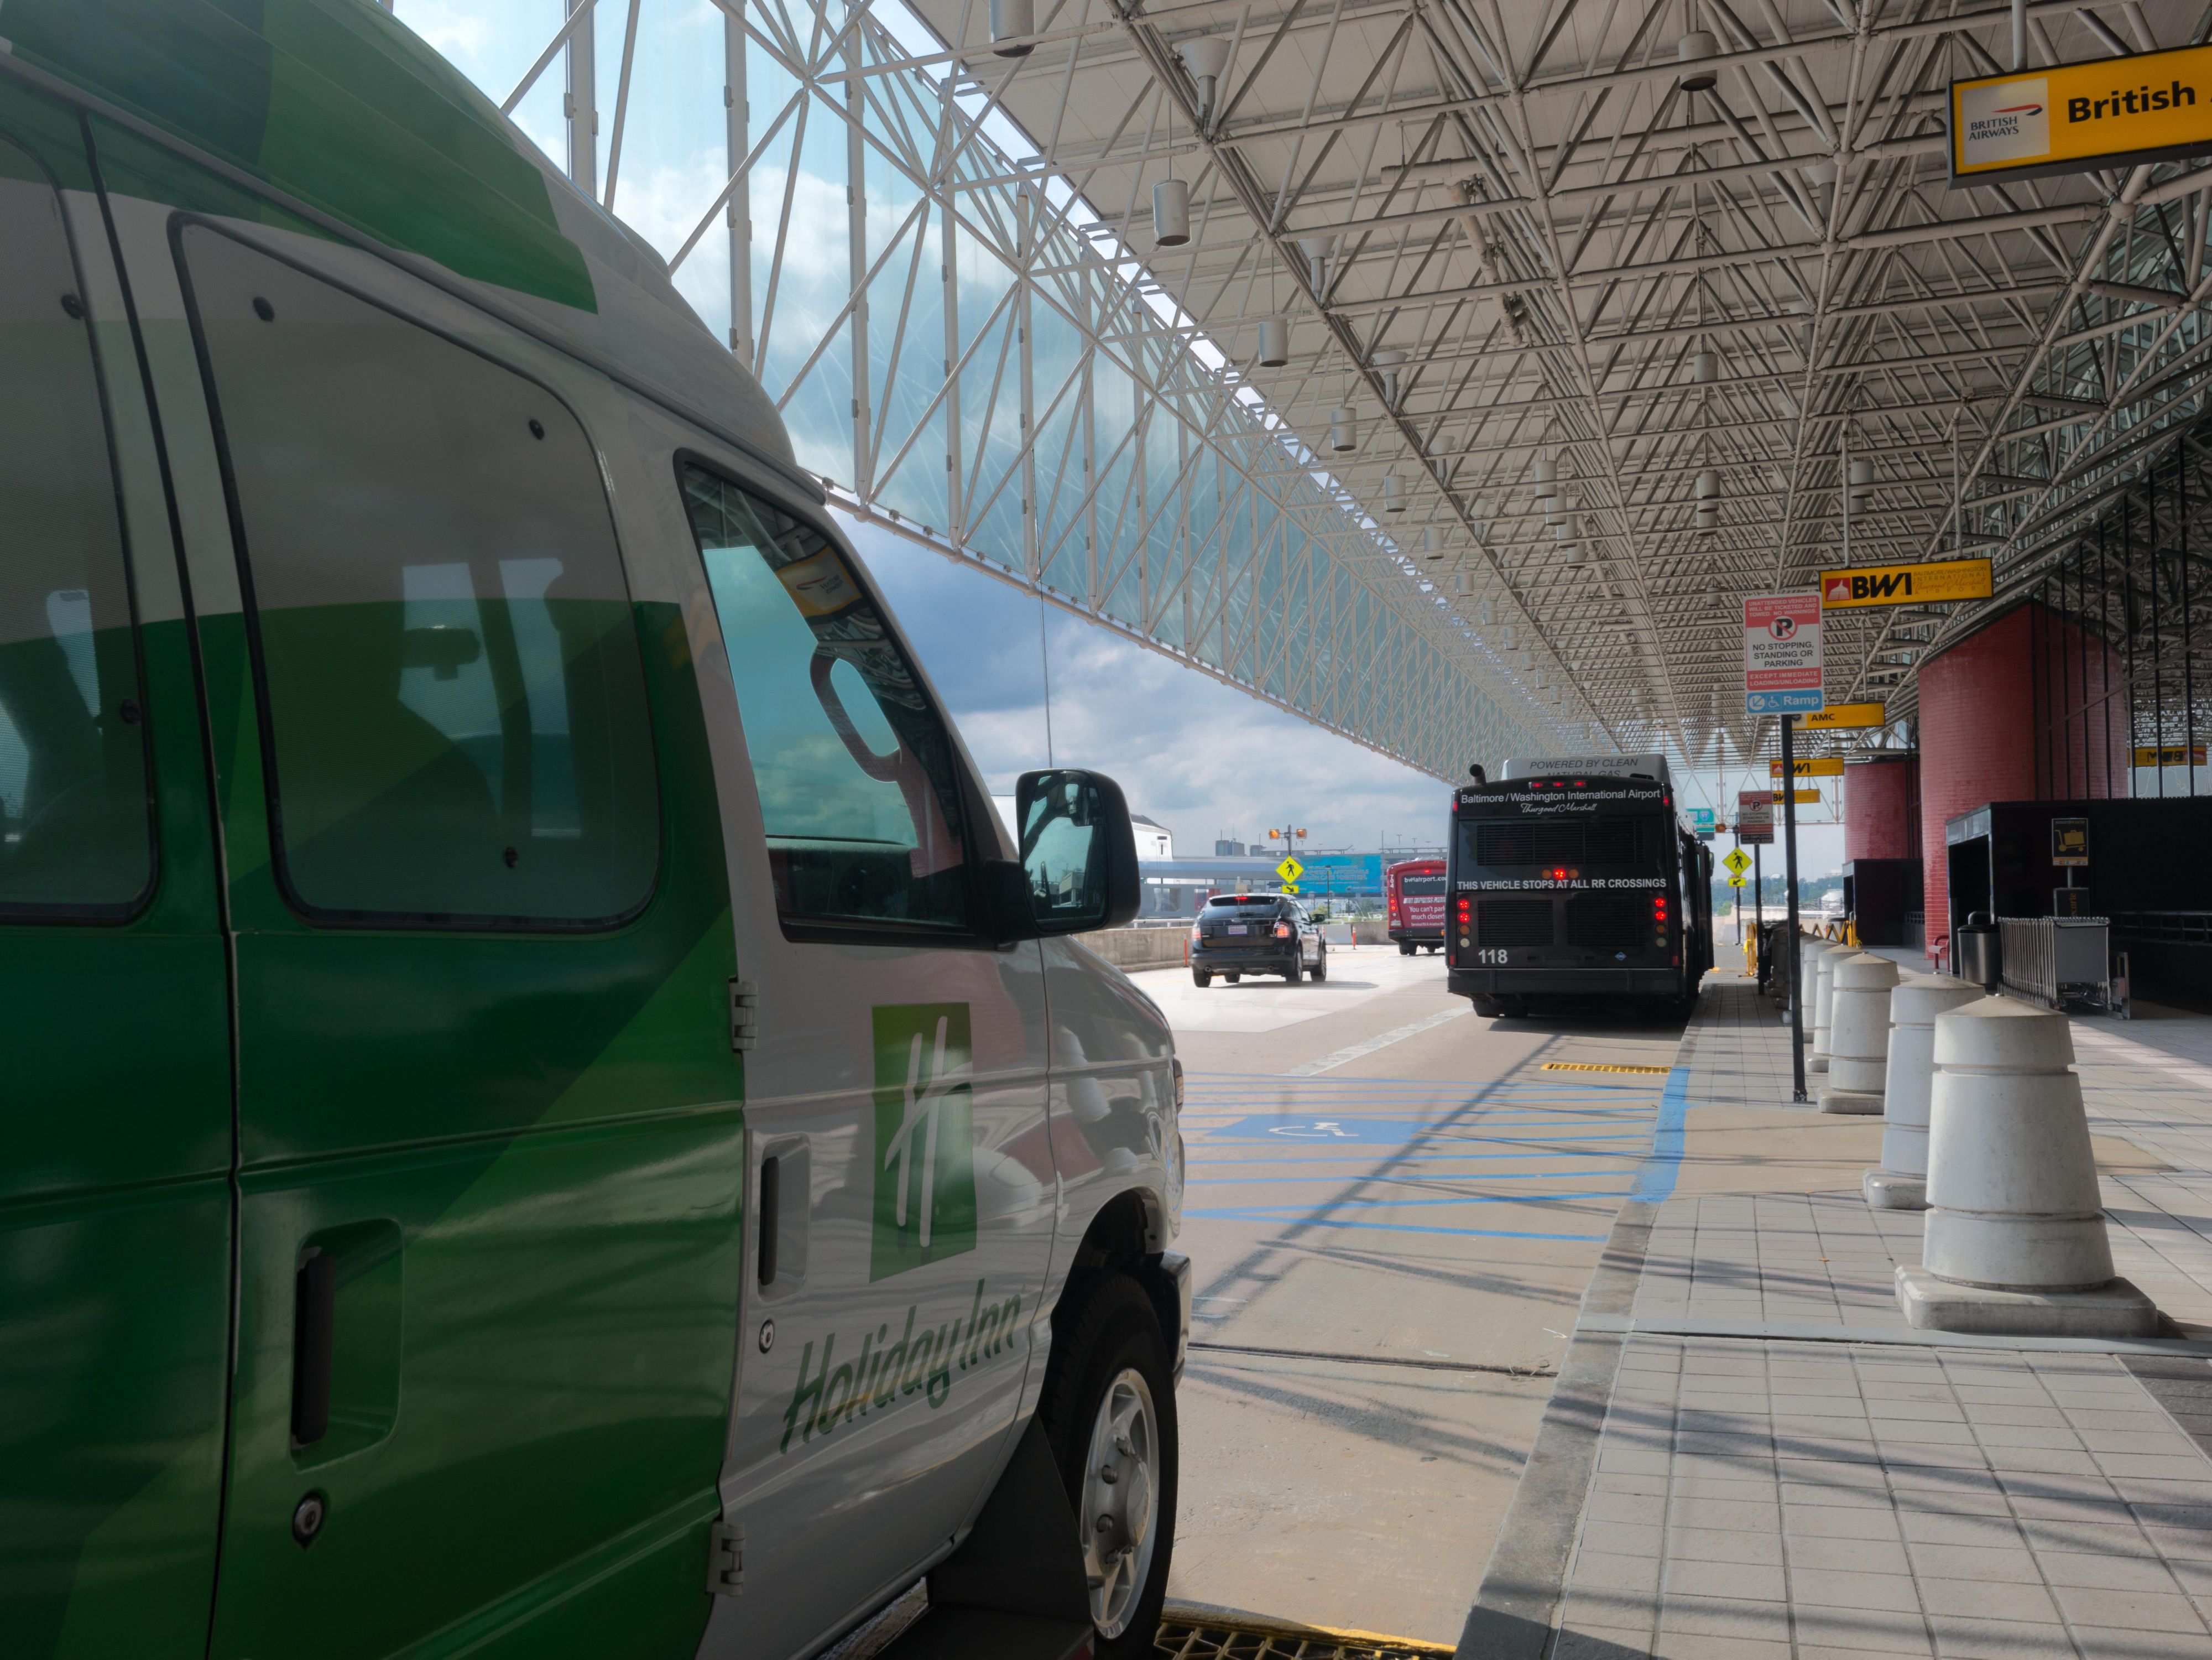 Our 24-hour complimentary airport shuttle service transports guests to and from BWI Airport, BWI Marc Train, BWI Amtrak and BWI Light Rail Stations.